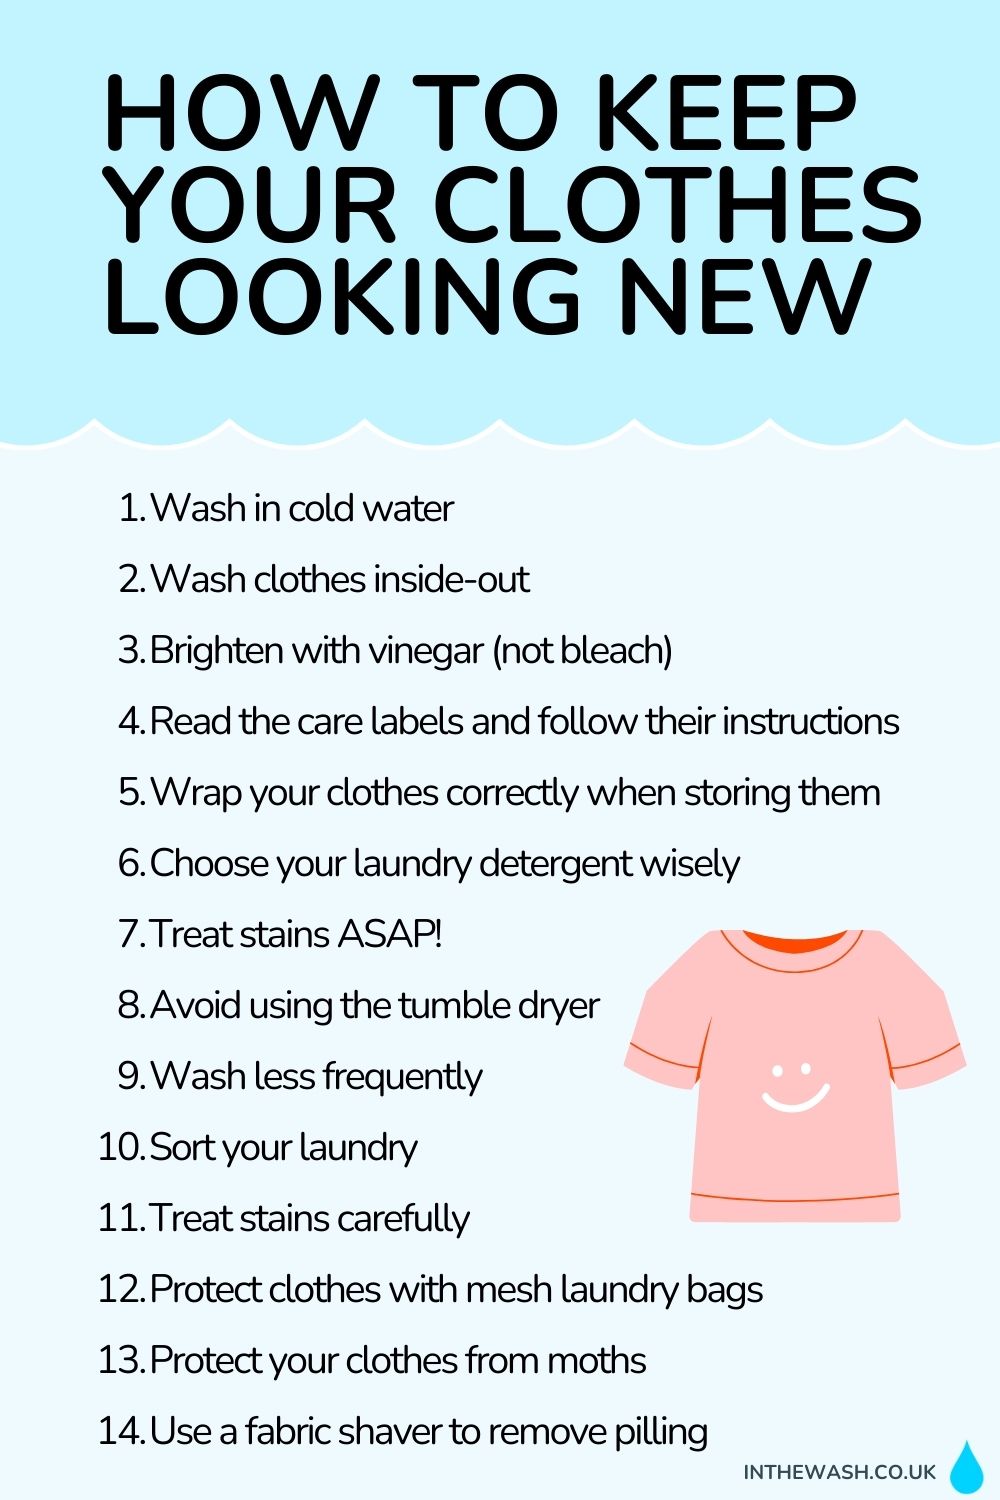 How to Keep Your Clothes Looking New